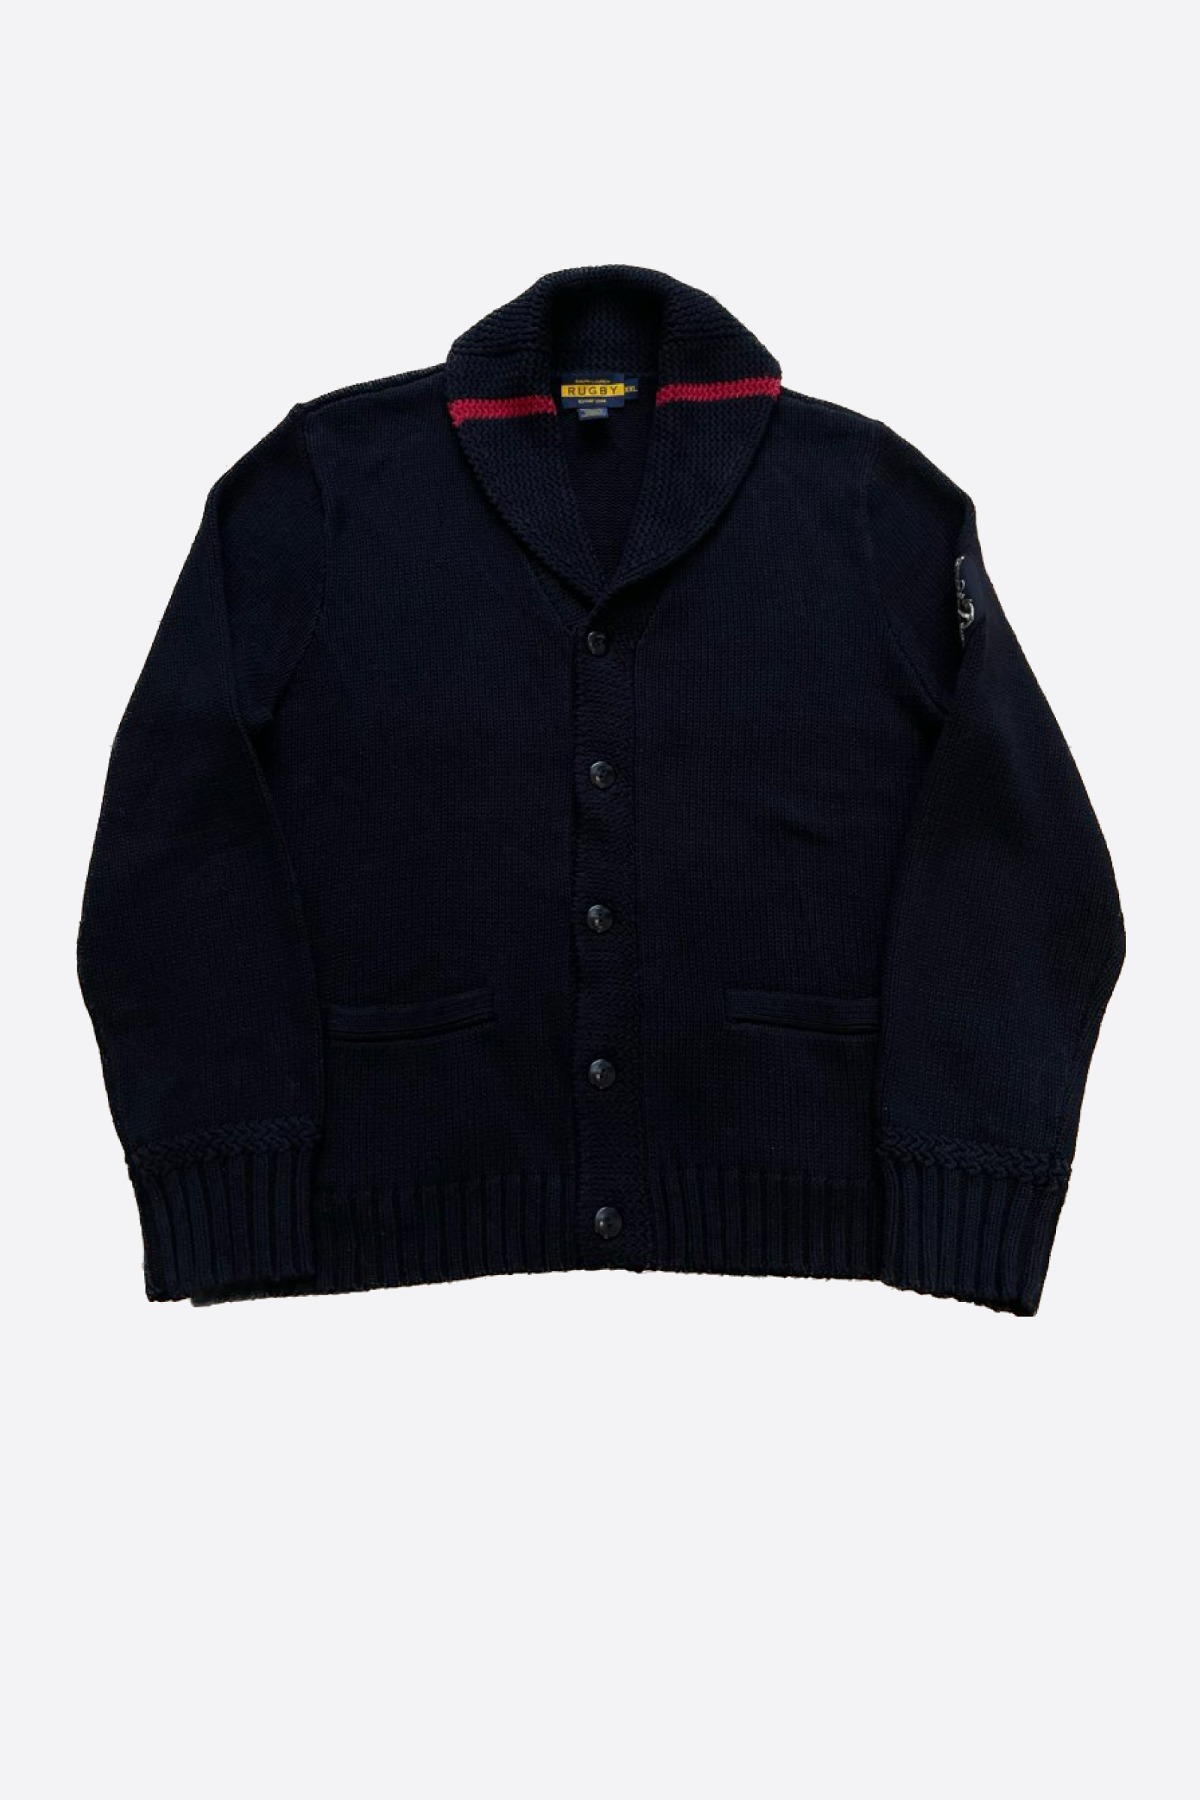 Rugby Ralph Lauren Shawl Collar Cardigan (110size) - With Homie 위드호미